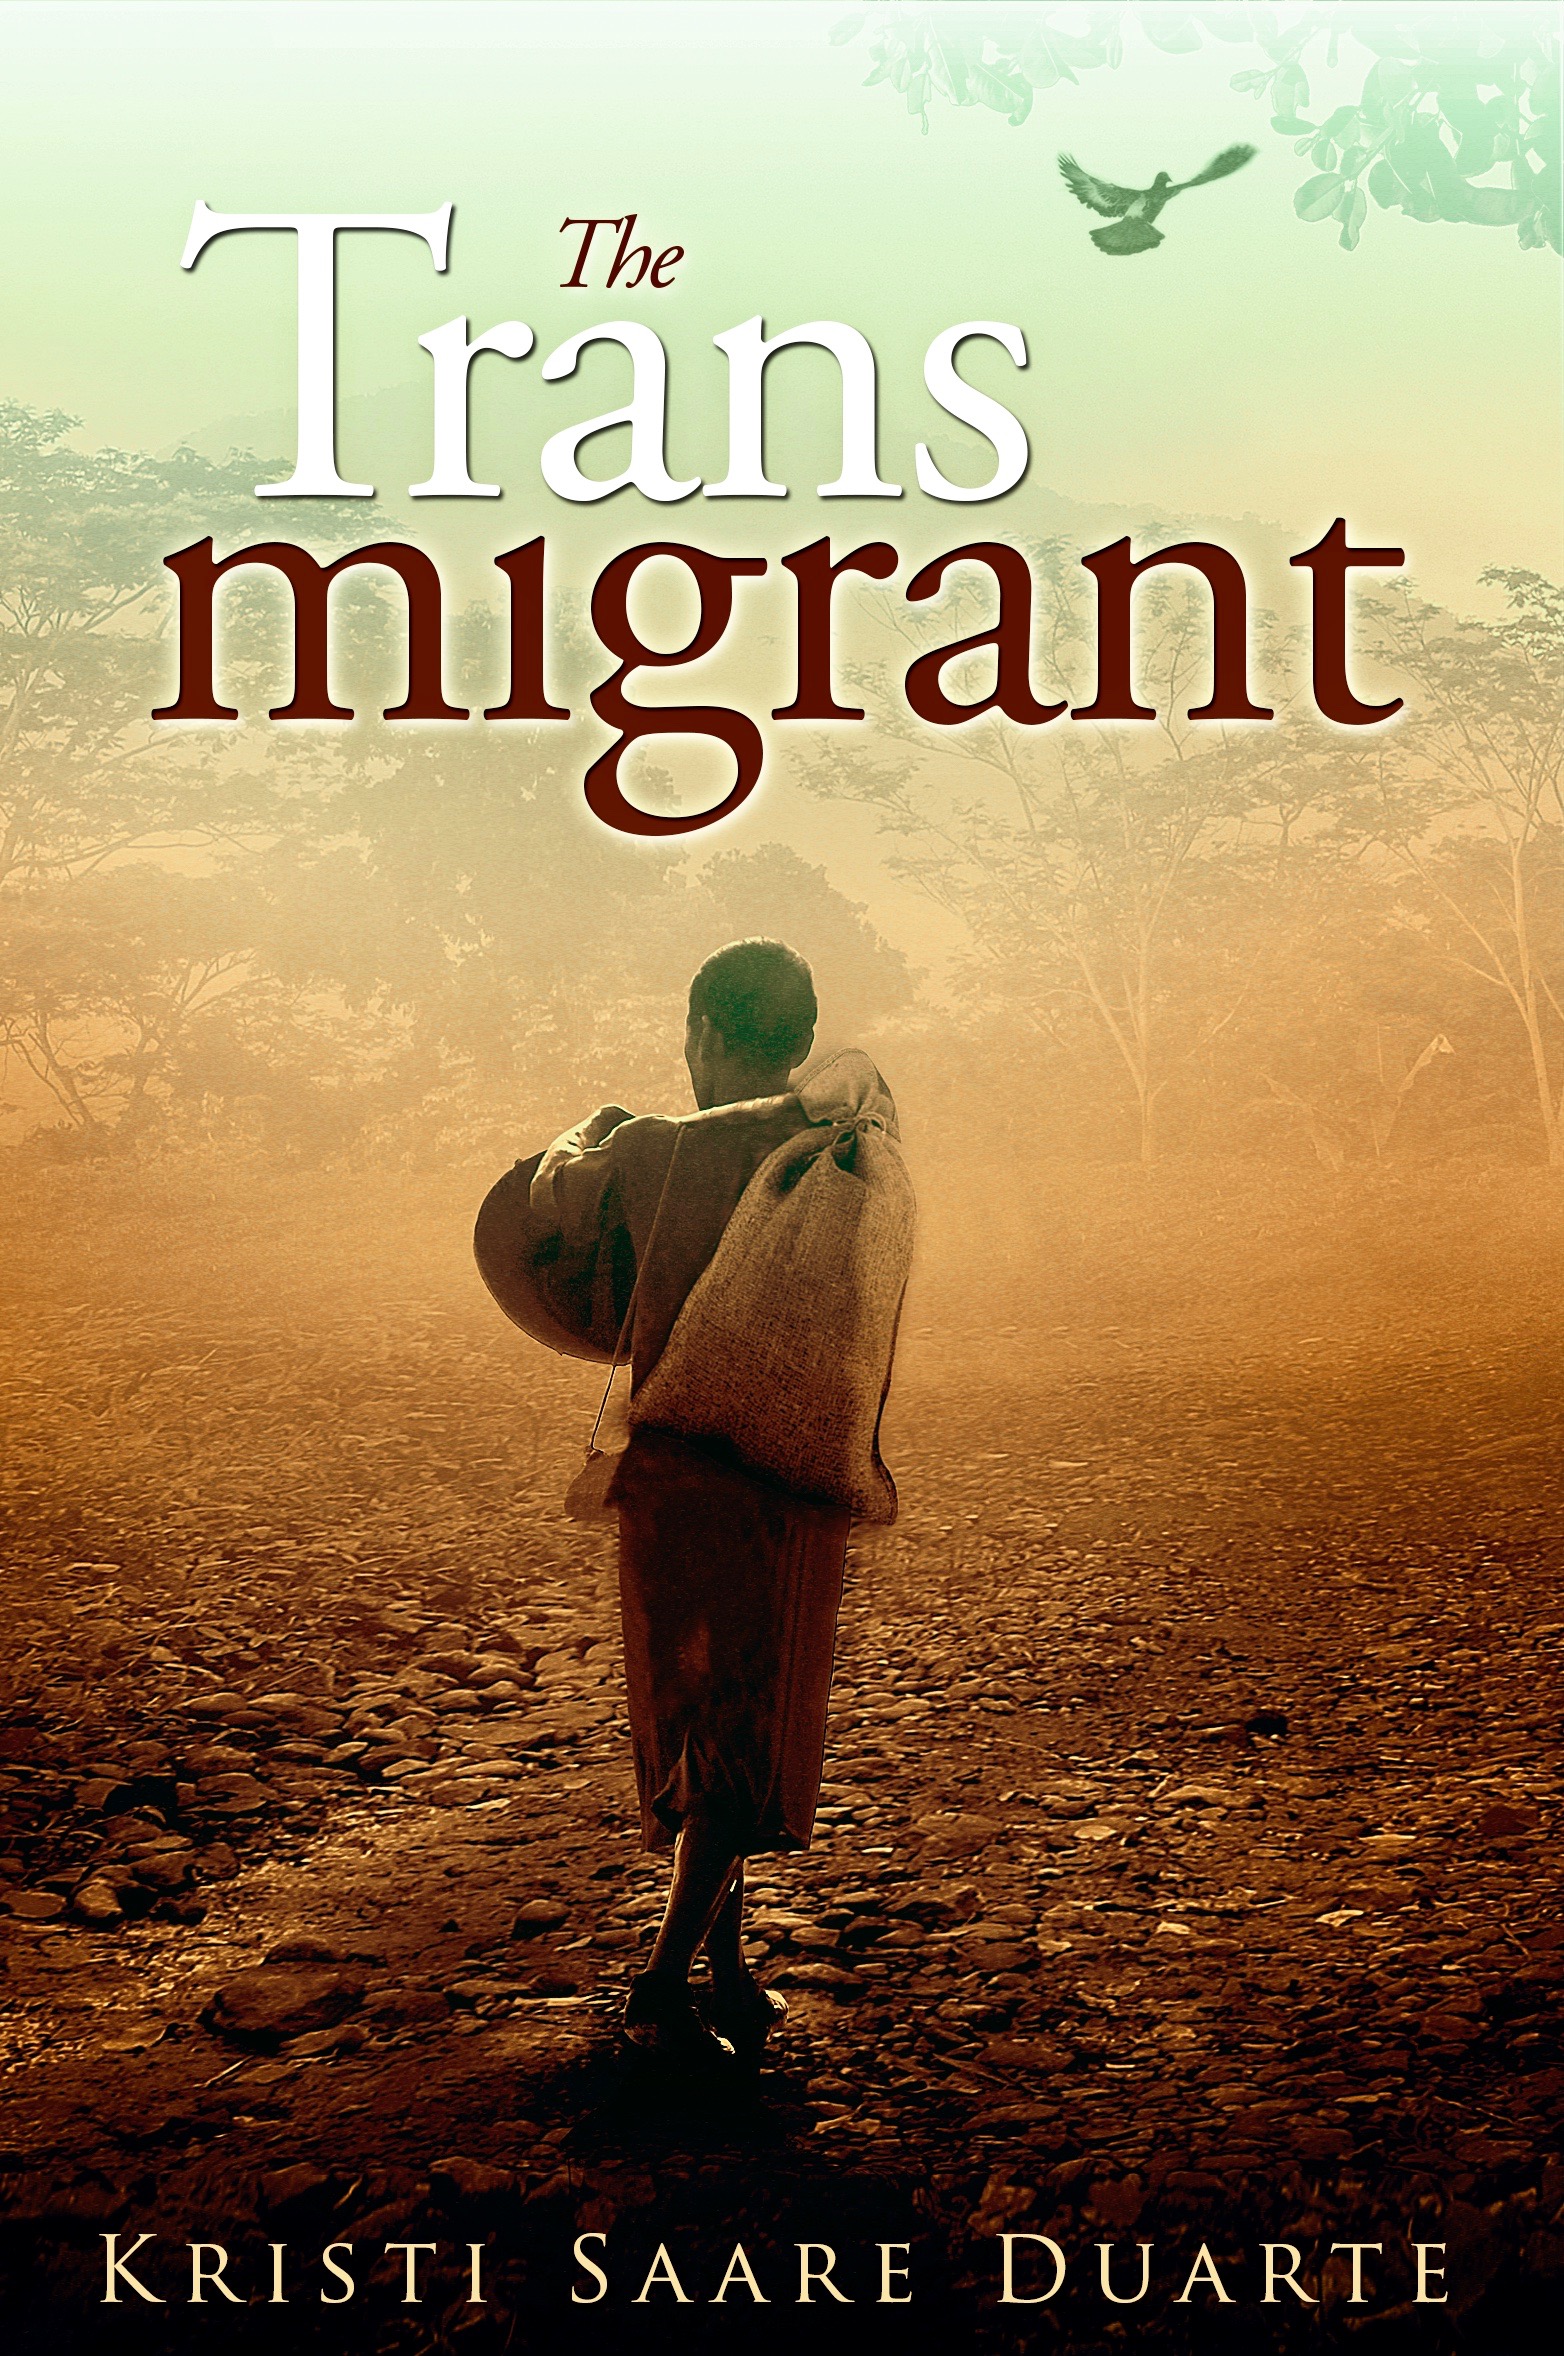 FREE: The Transmigrant by Kristi Saare Duarte